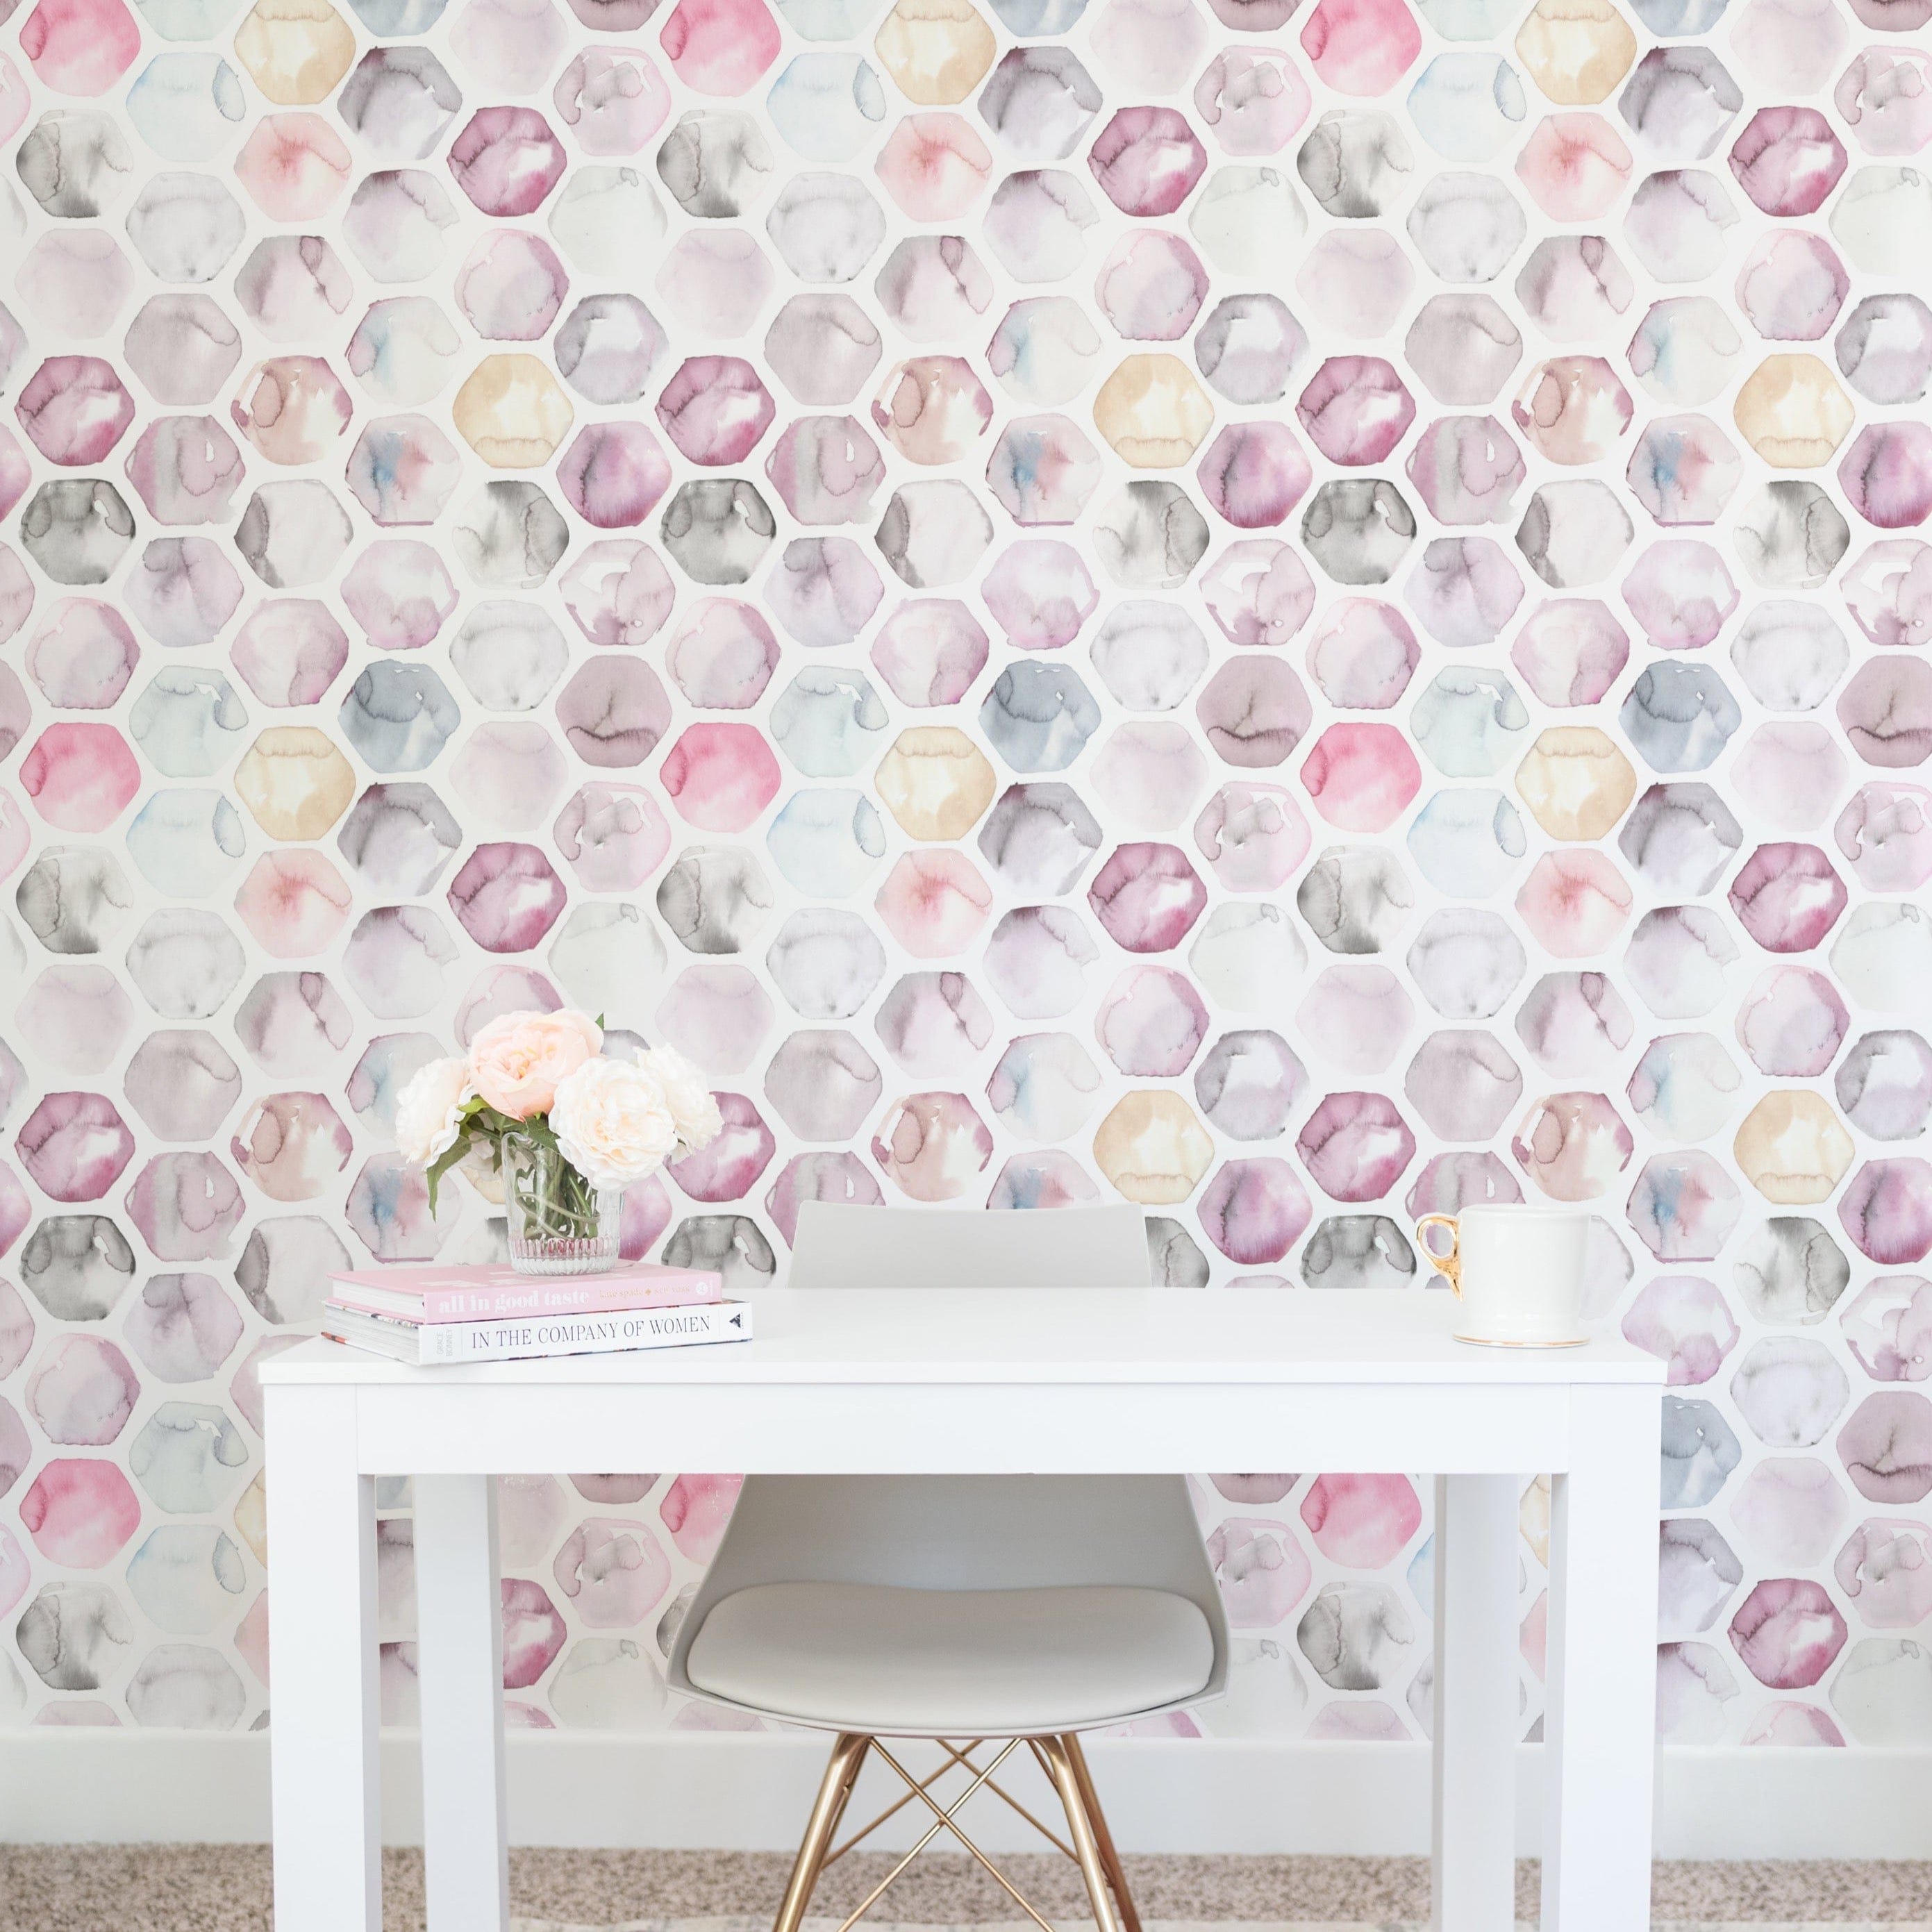 A creative workspace with the Watercolour Honeycomb Wallpaper providing an inspiring backdrop. The wall features soft, watercolor hexagons in a honeycomb pattern behind a minimalist white desk, accented by a vase of fresh flowers and simple desk accessories.